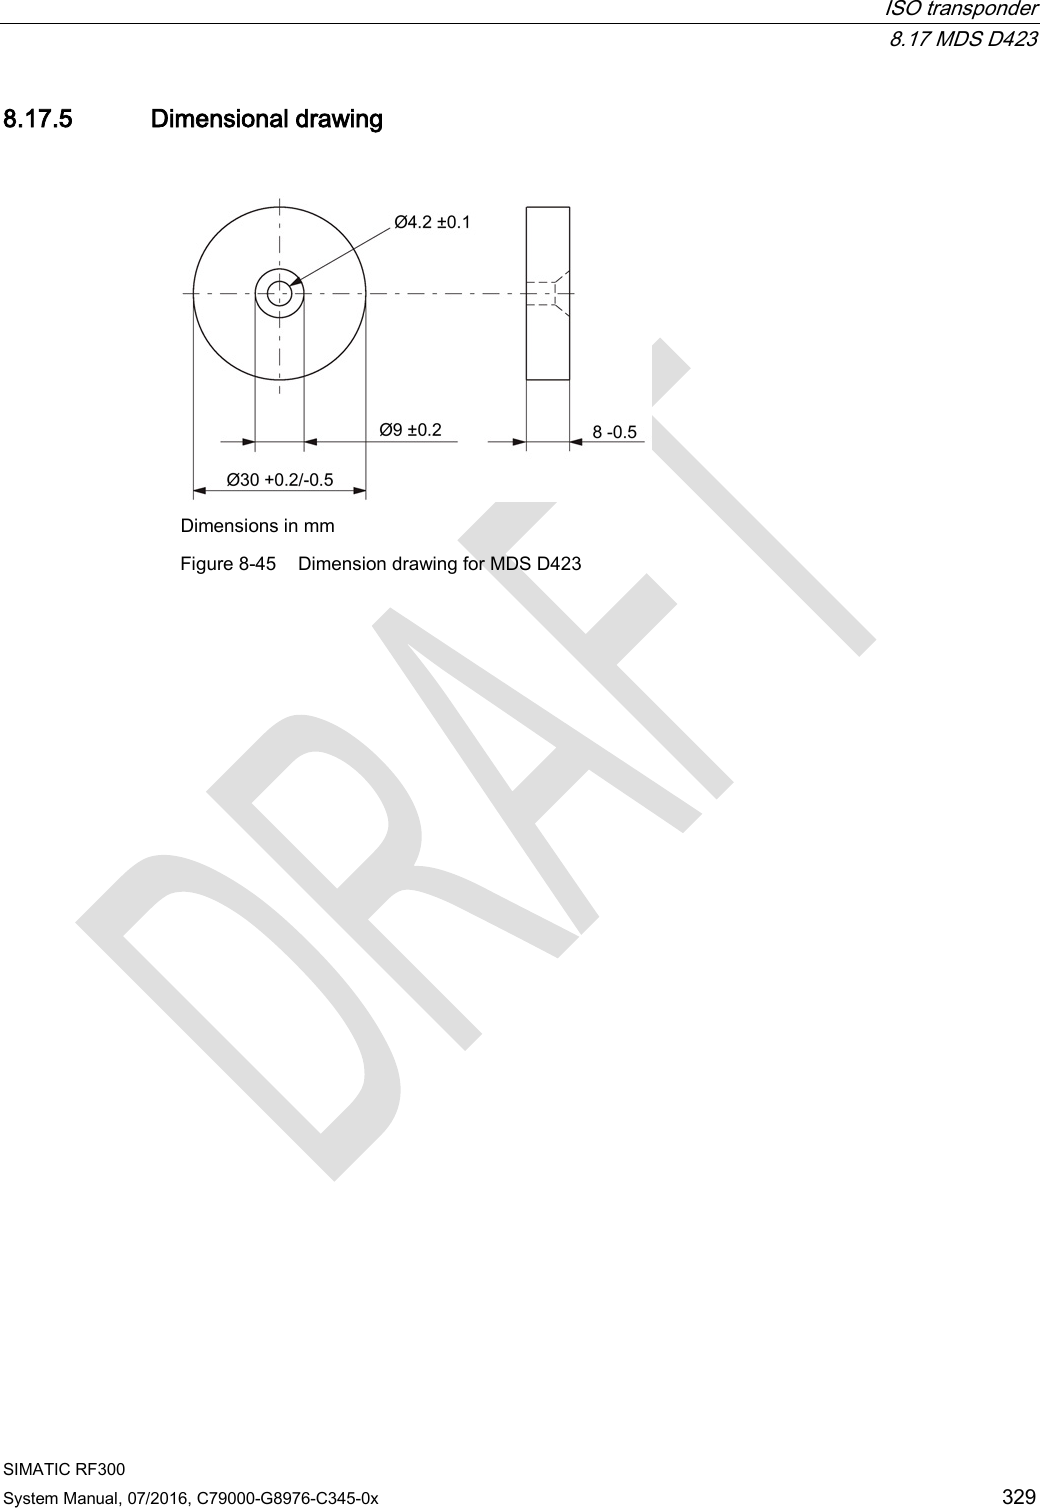  ISO transponder  8.17 MDS D423 SIMATIC RF300 System Manual, 07/2016, C79000-G8976-C345-0x 329 8.17.5 Dimensional drawing   Dimensions in mm Figure 8-45 Dimension drawing for MDS D423 